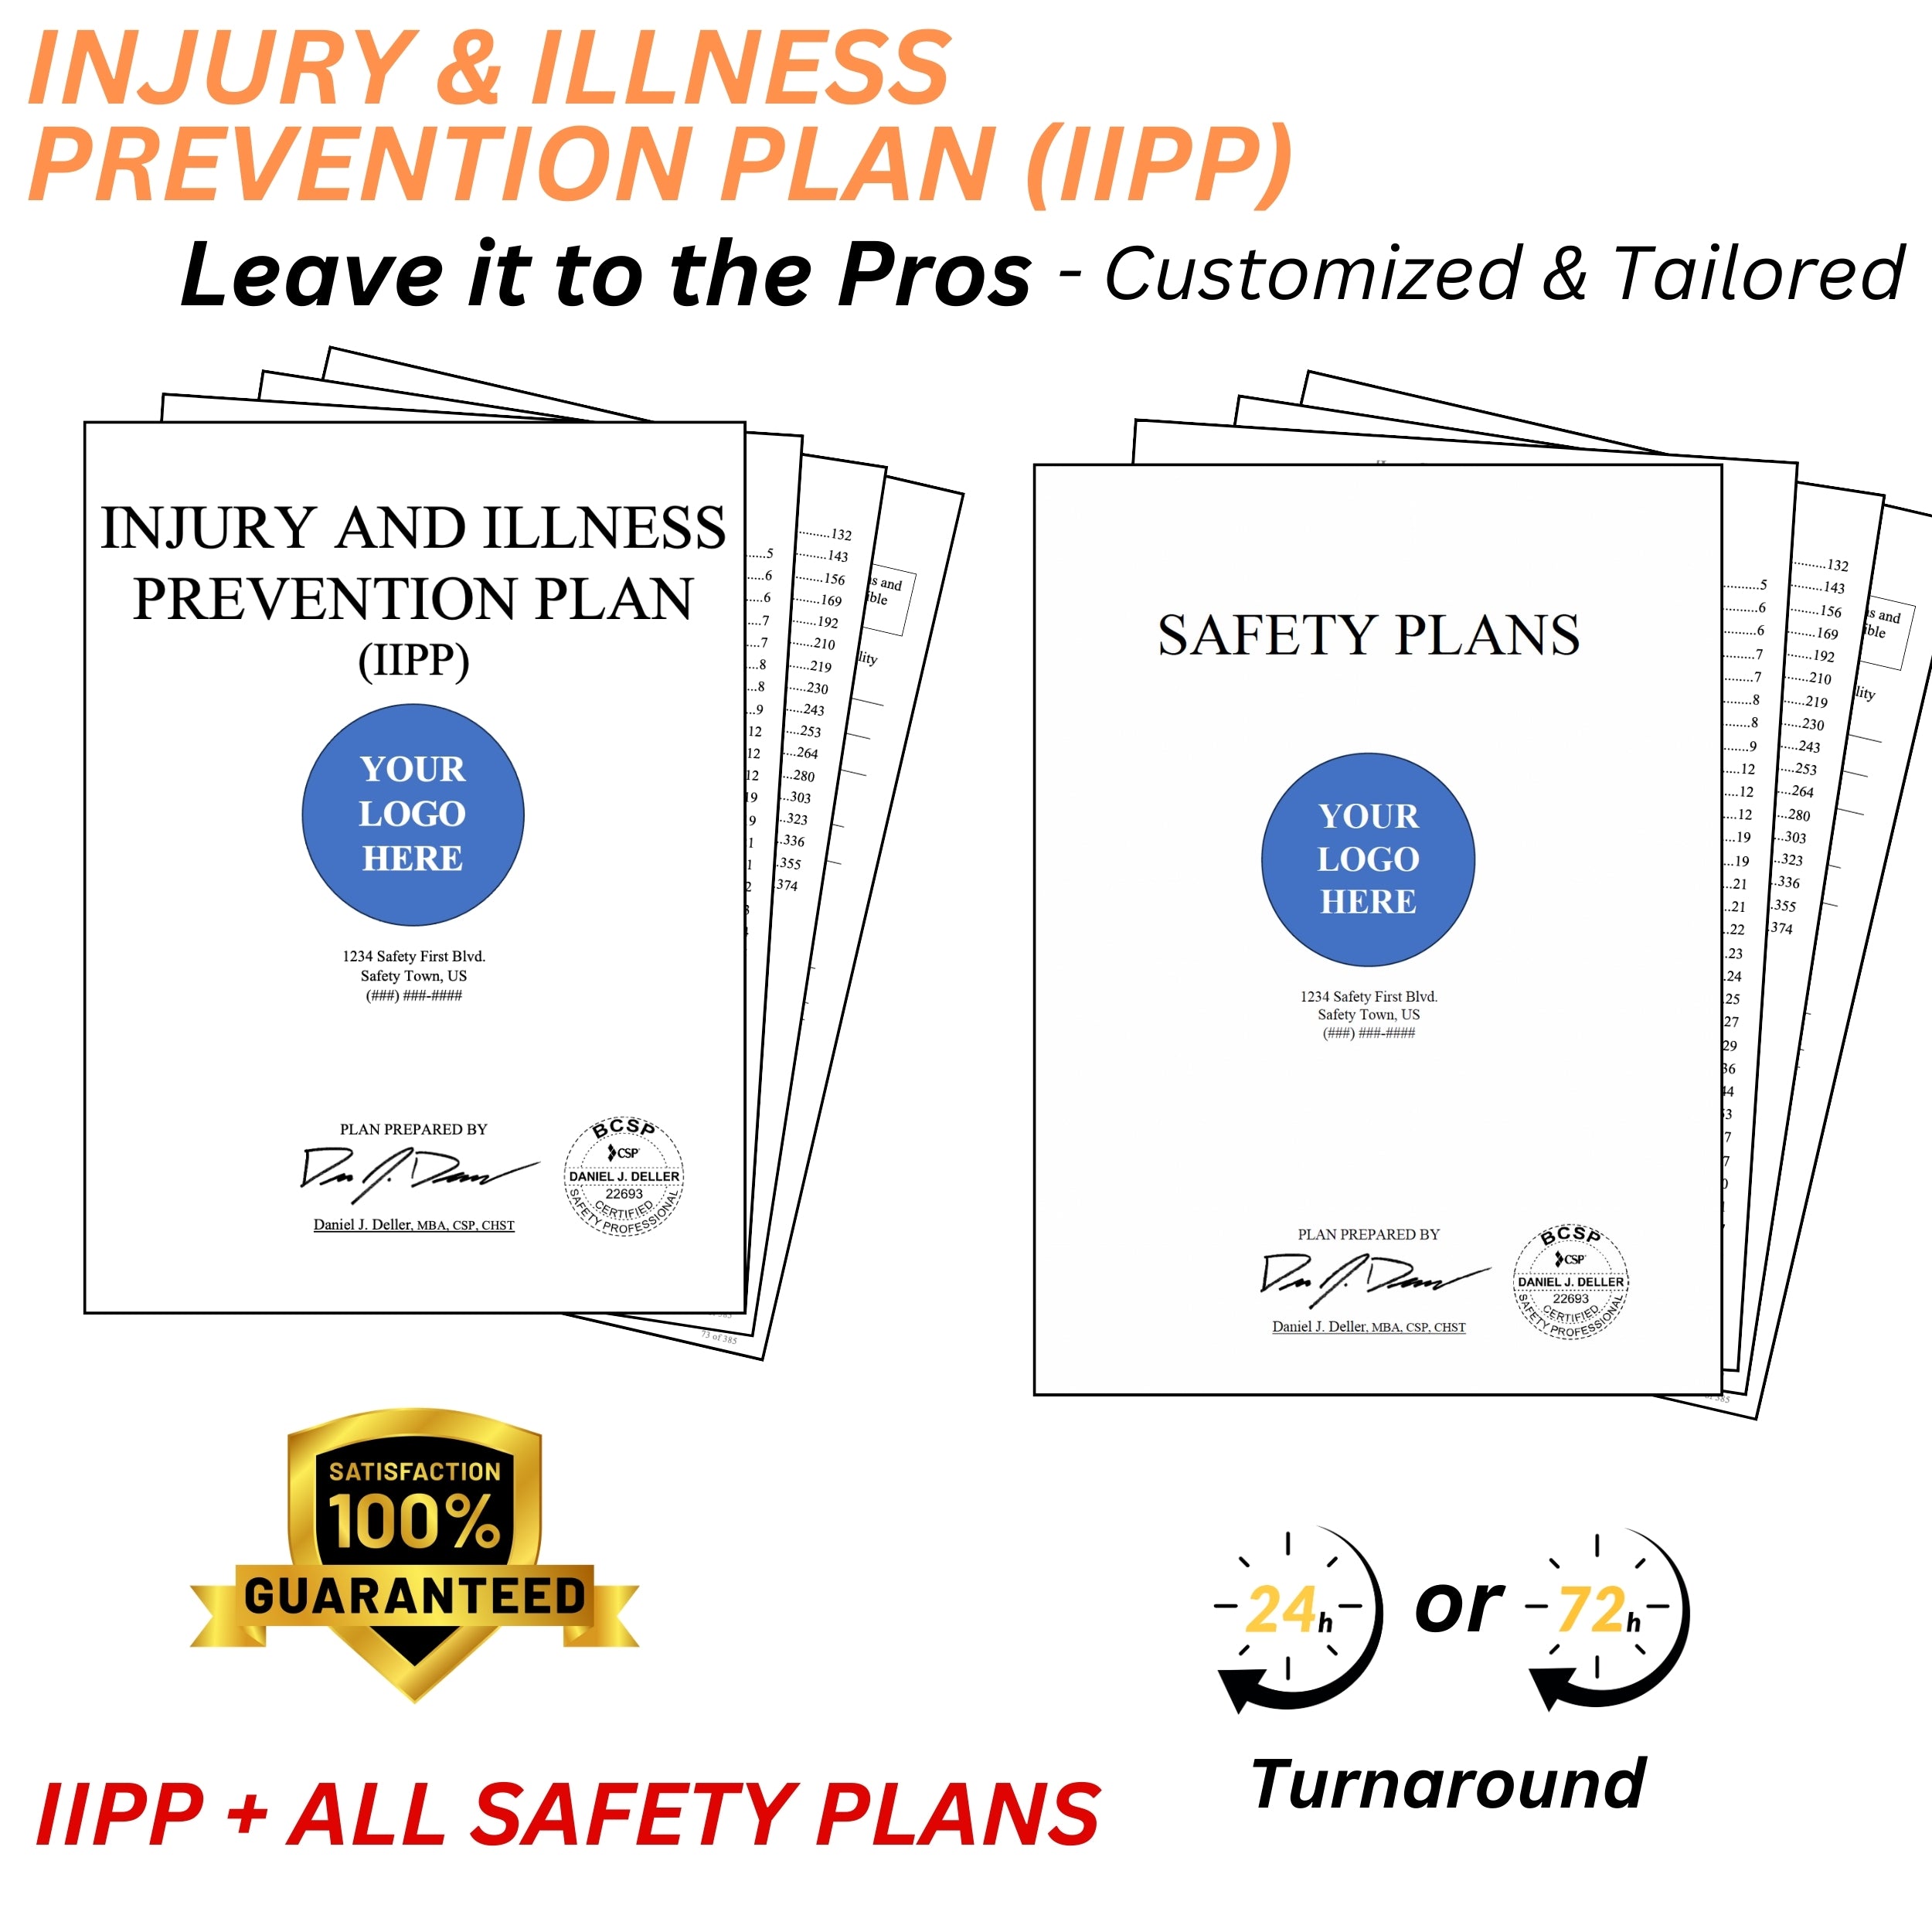 Upgrade IIPP ONLY to IIPP + All Safety Plans